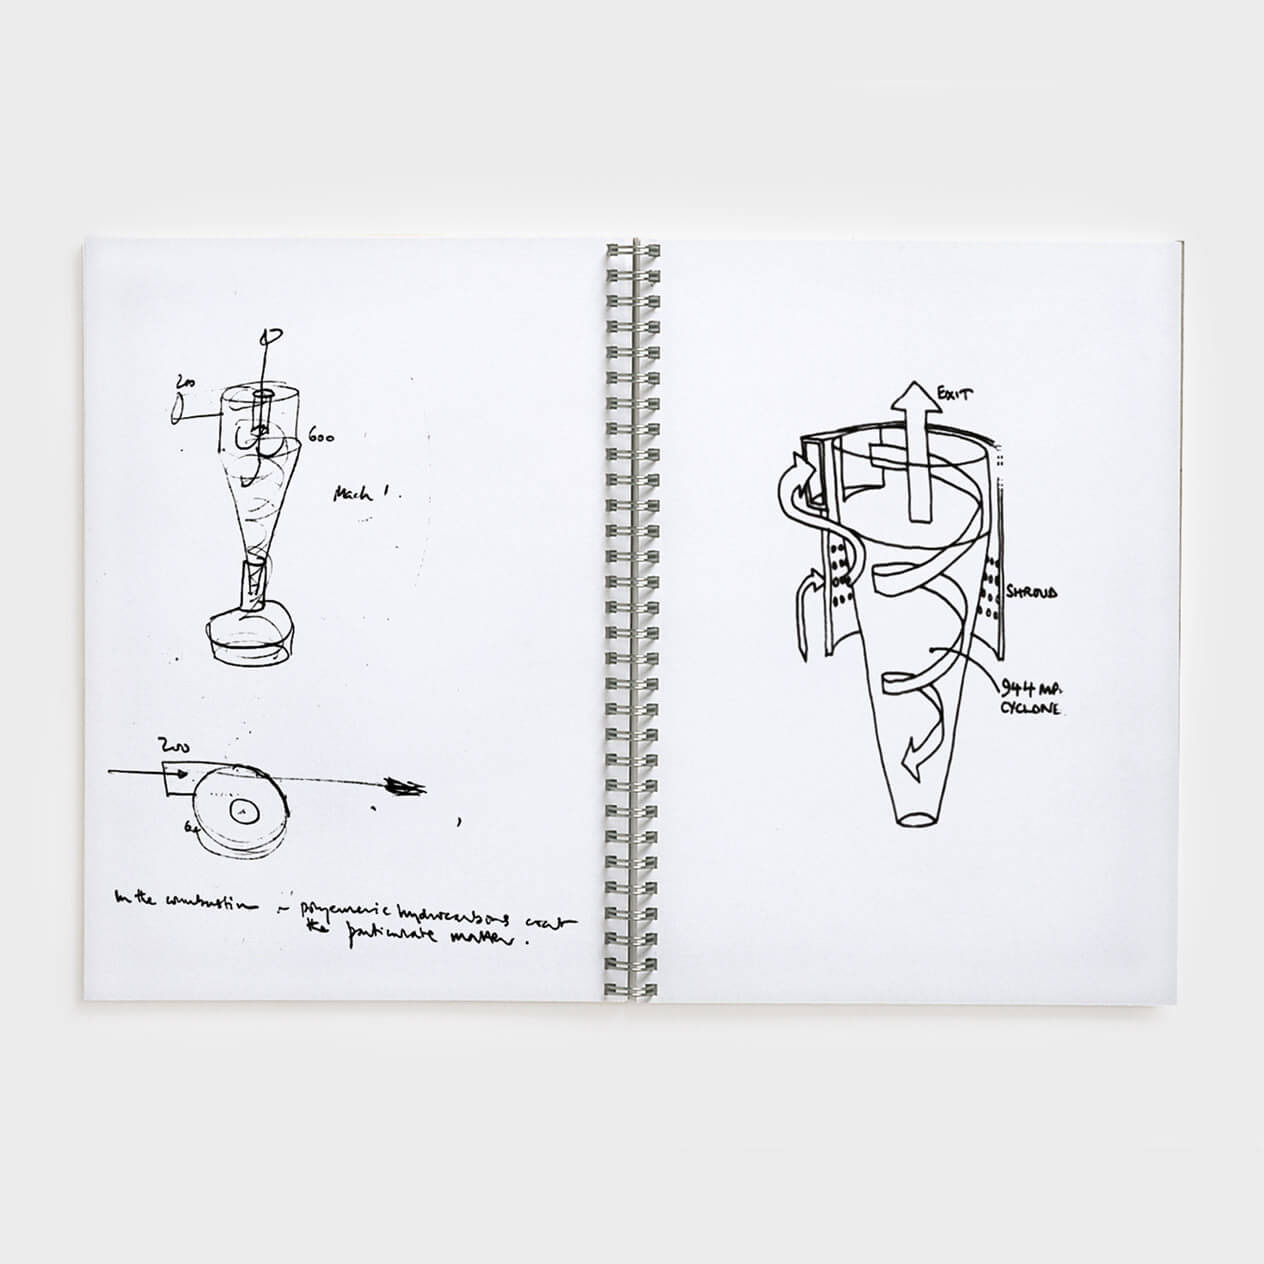 notepad containing sketches of the Dyson cyclonic vacuum cleaner.